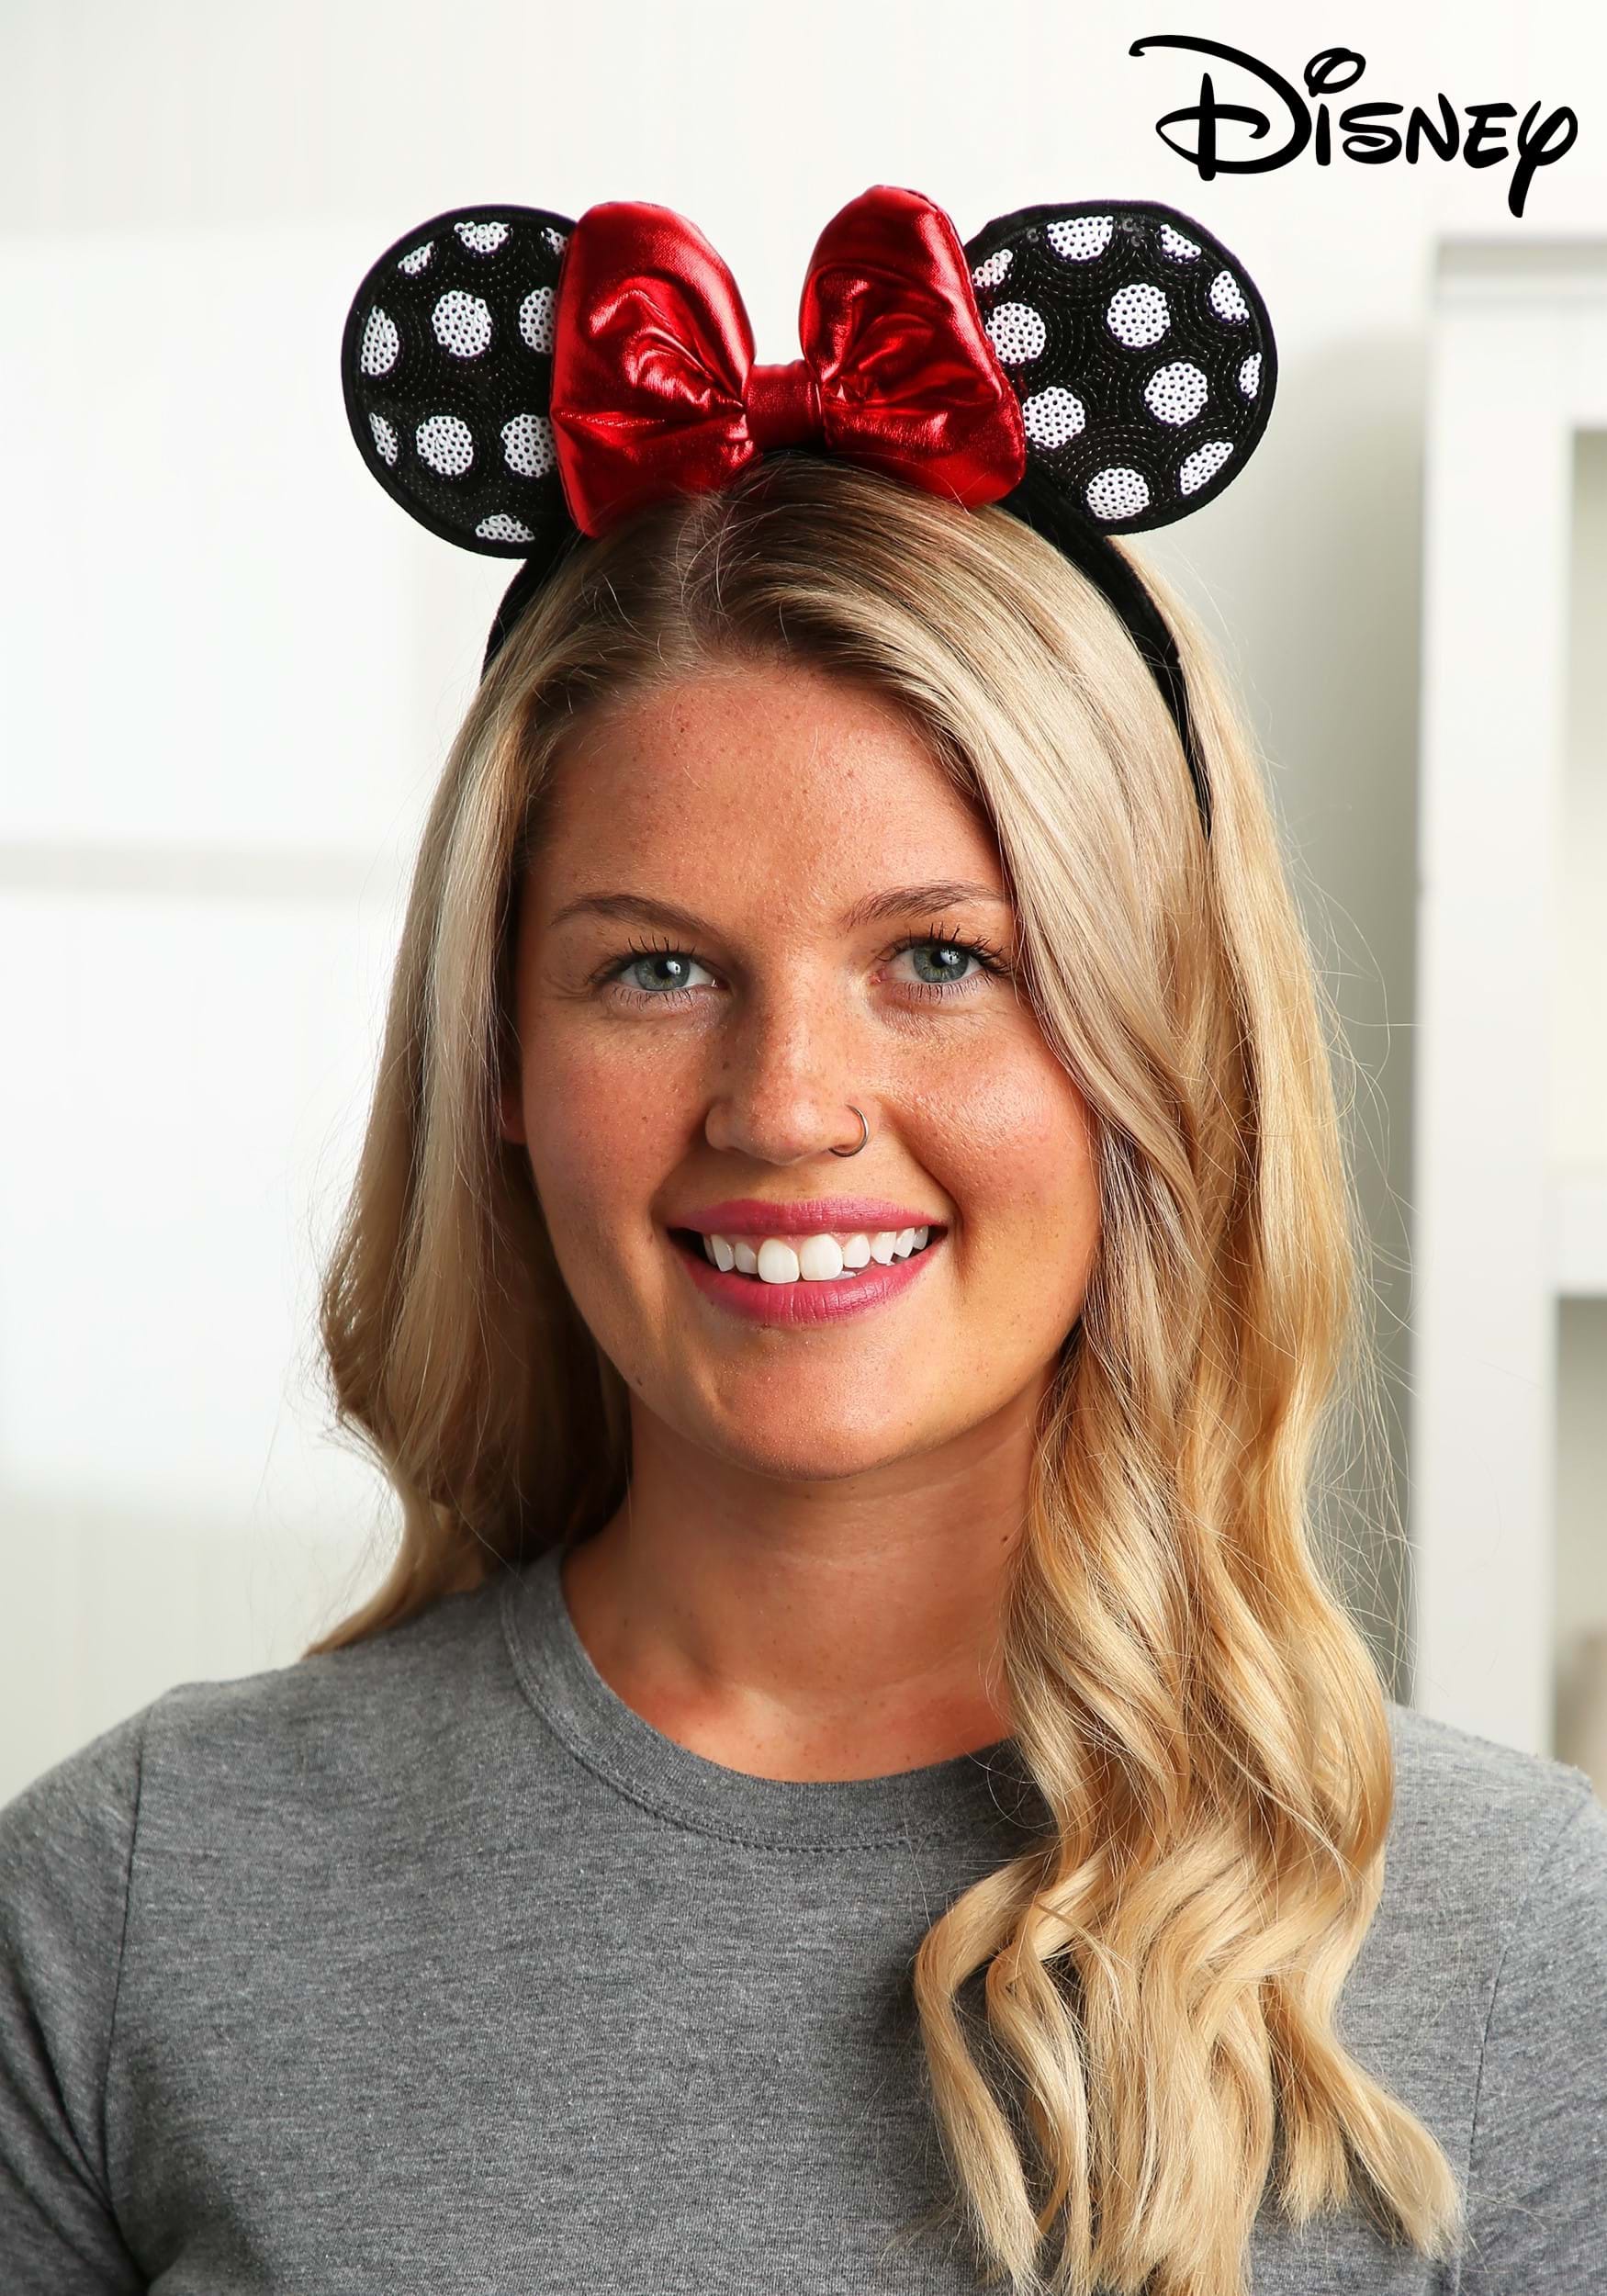 Minnie Mouse Ears Headband Polka Dot Bow Party Costume Accessory, Size: One Size